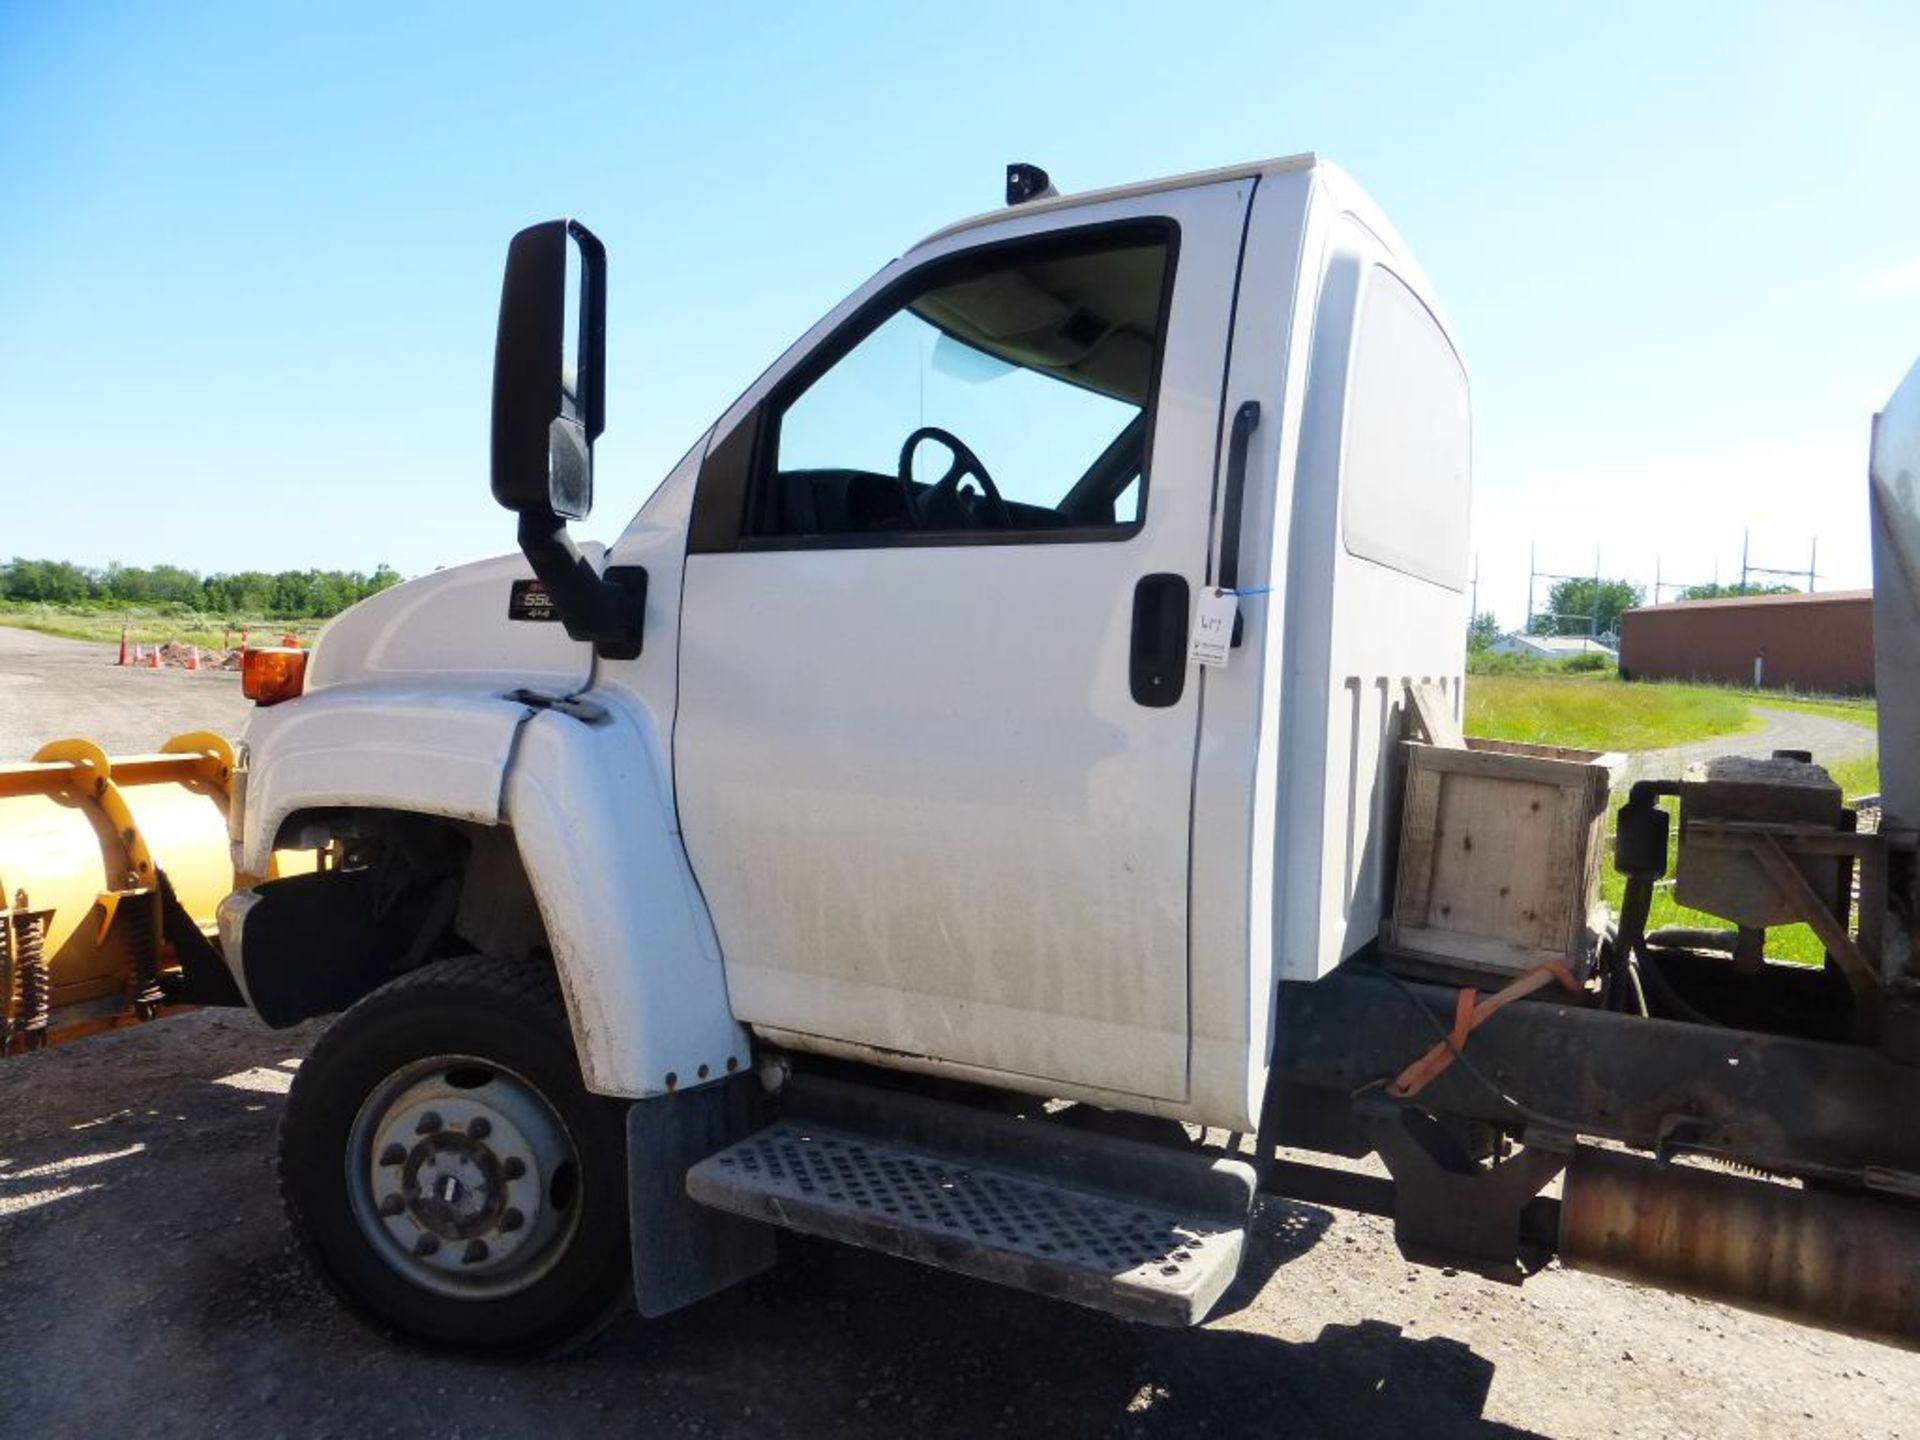 2008 GMC 5500 4x4 Plow Truck with Spreader | Vin No. 1GDE5C3G39F404627; GVWR: 19,500; 15,312 - Image 18 of 29